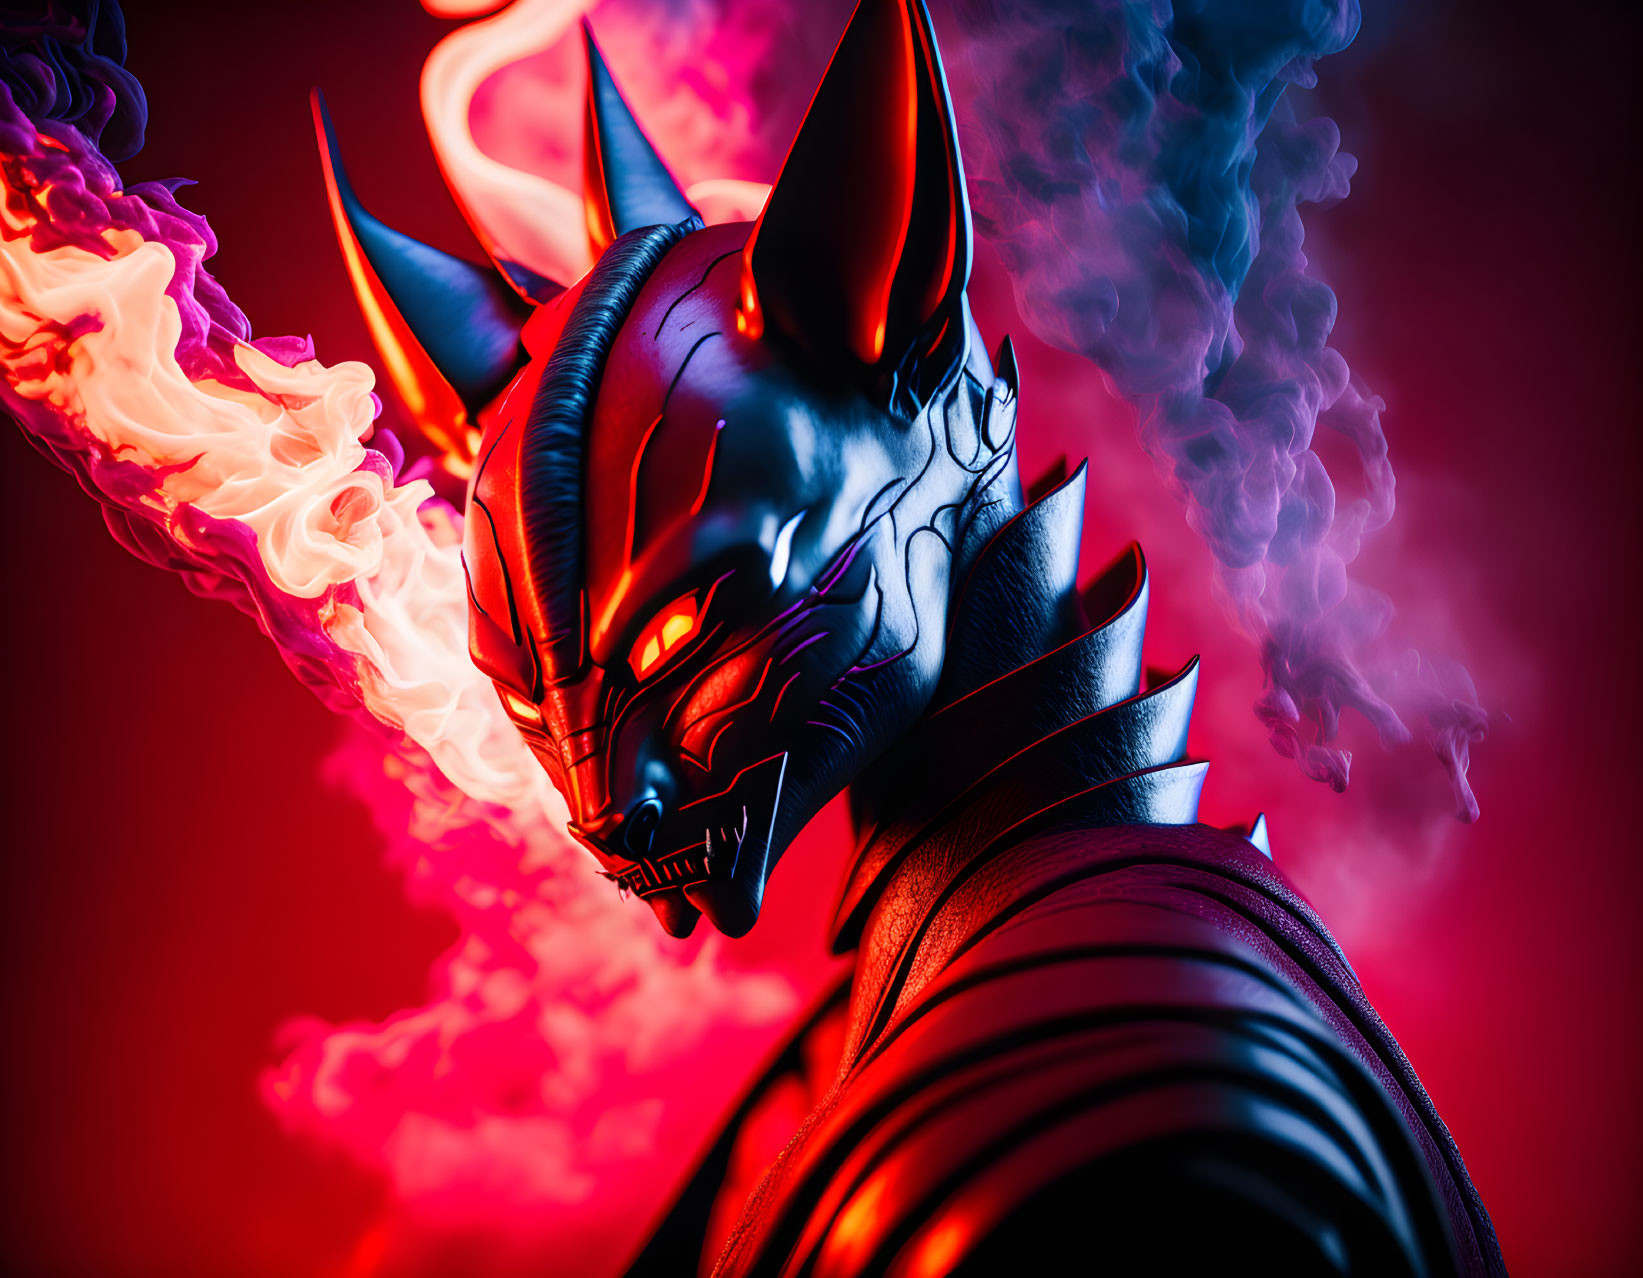 Beerus, Dark Lord of the Sith.